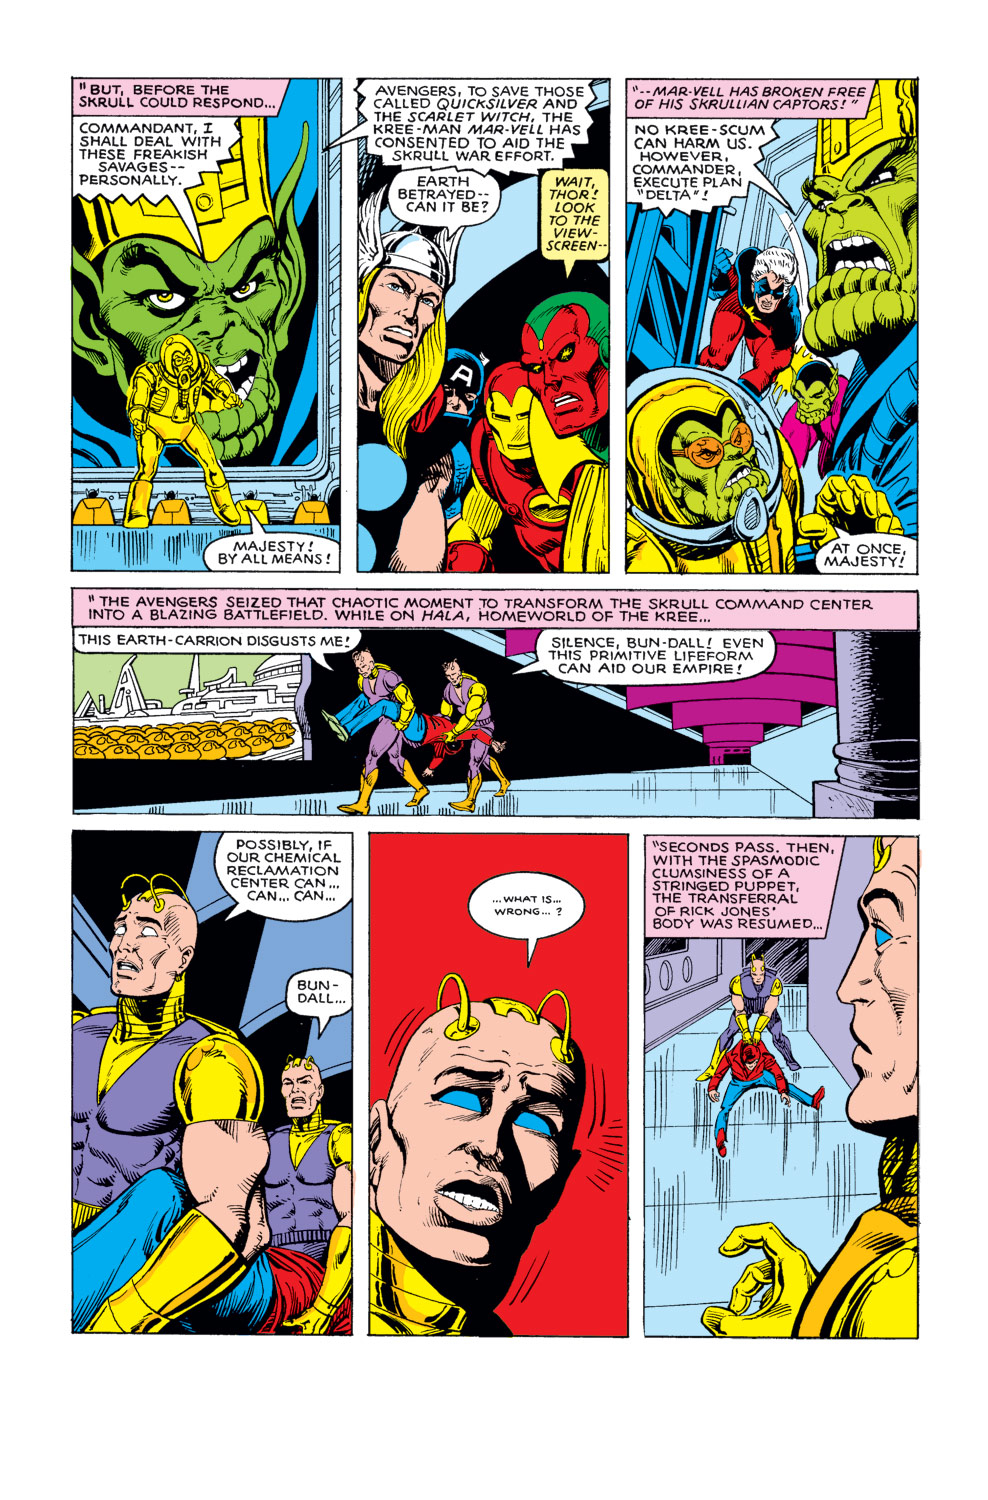 What If? (1977) issue 20 - The Avengers fought the Kree-Skrull war without Rick Jones - Page 7